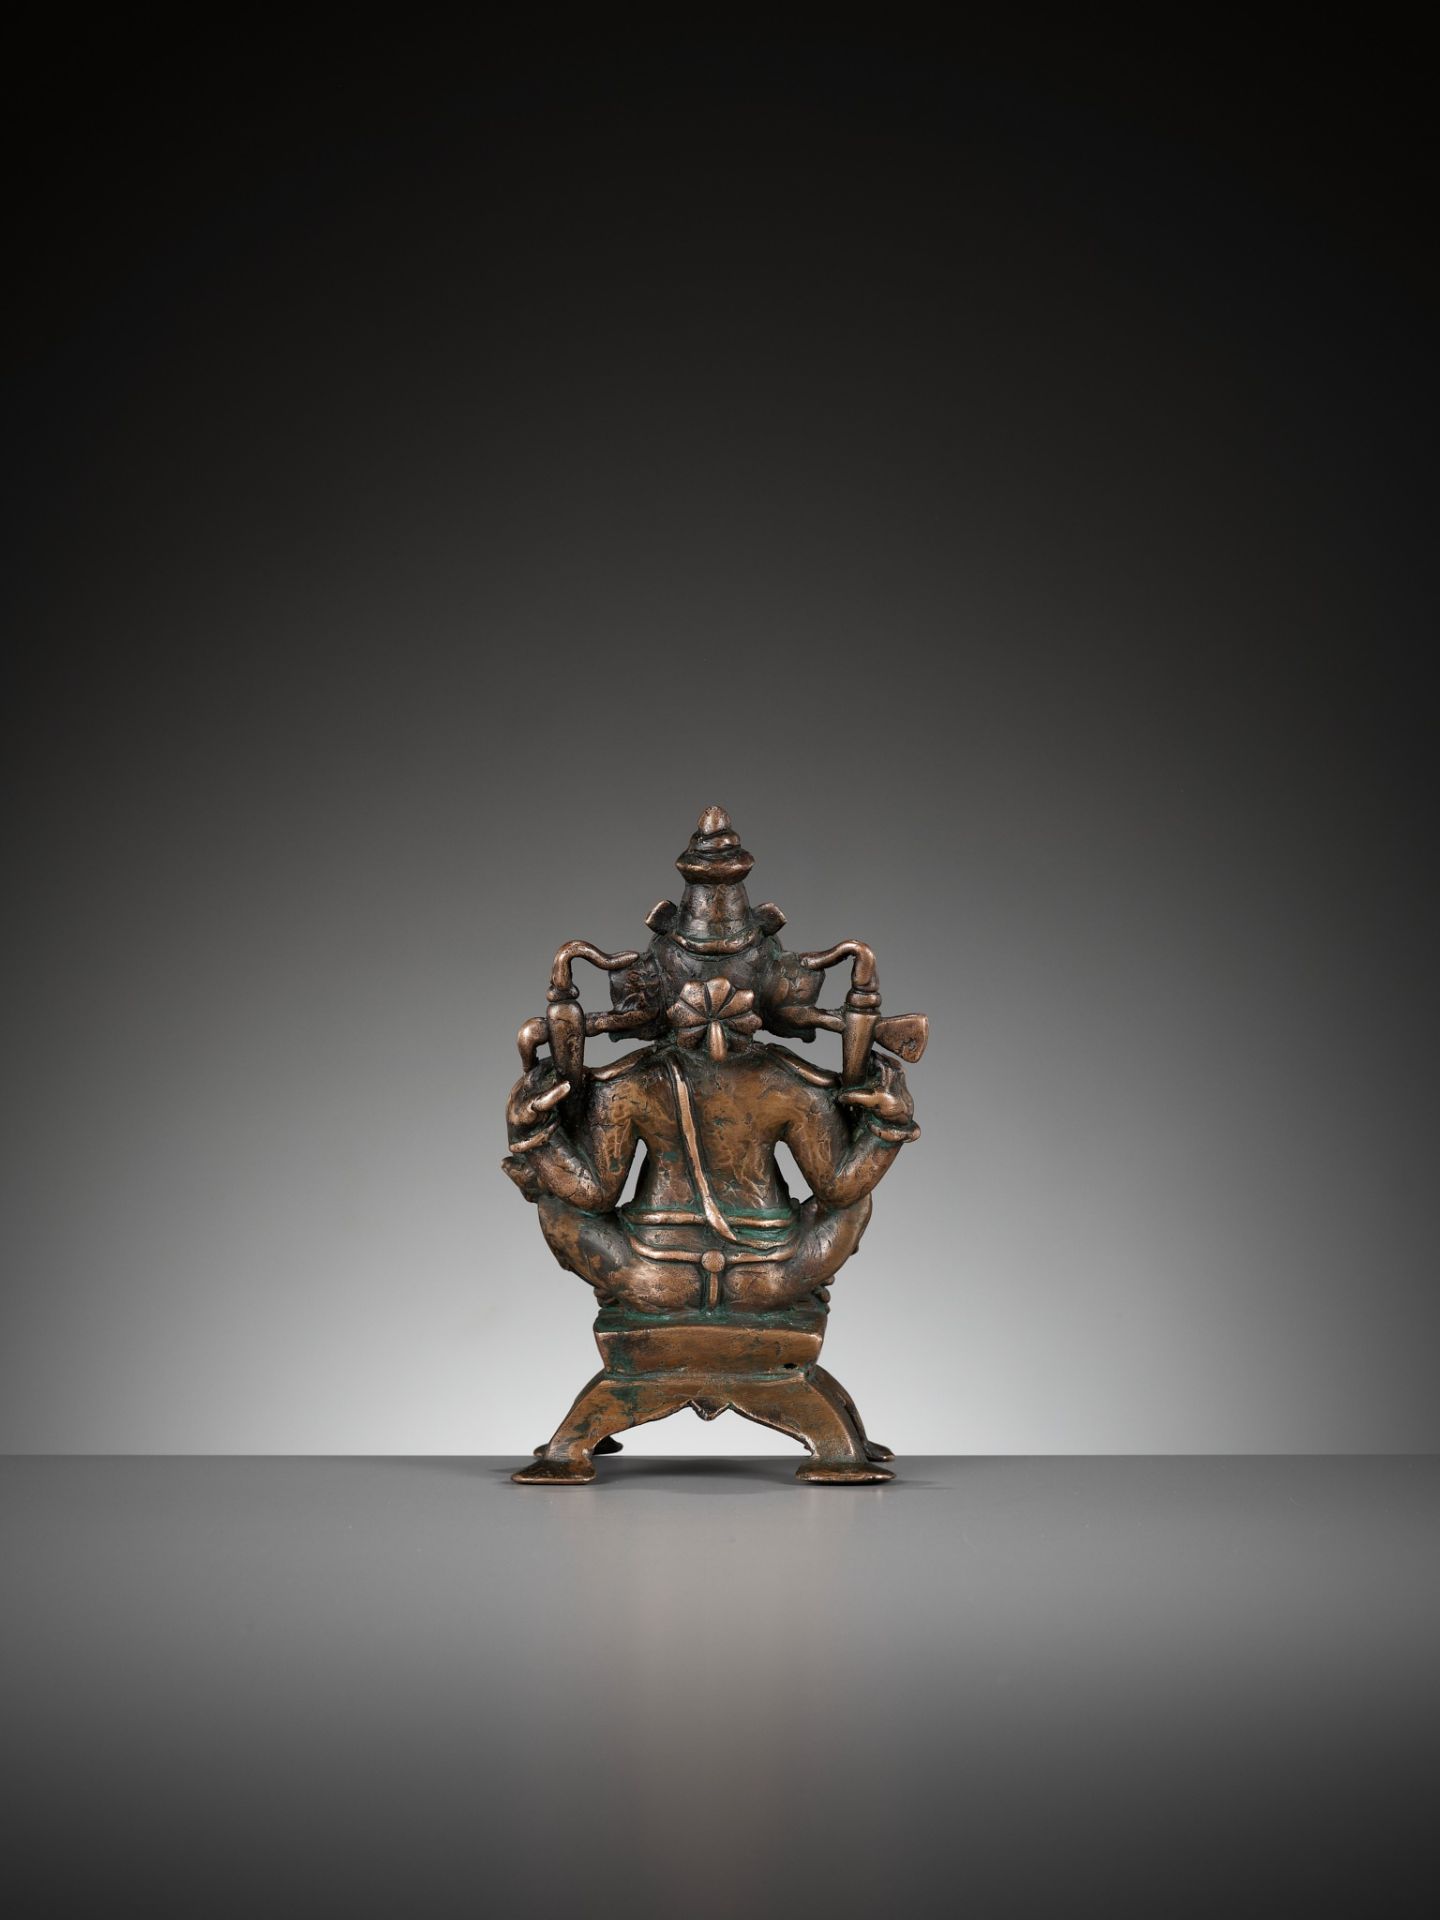 A SILVER-INLAID COPPER ALLOY FIGURE OF GANESHA, SOUTH INDIA, C. 1650-1750 - Image 8 of 12